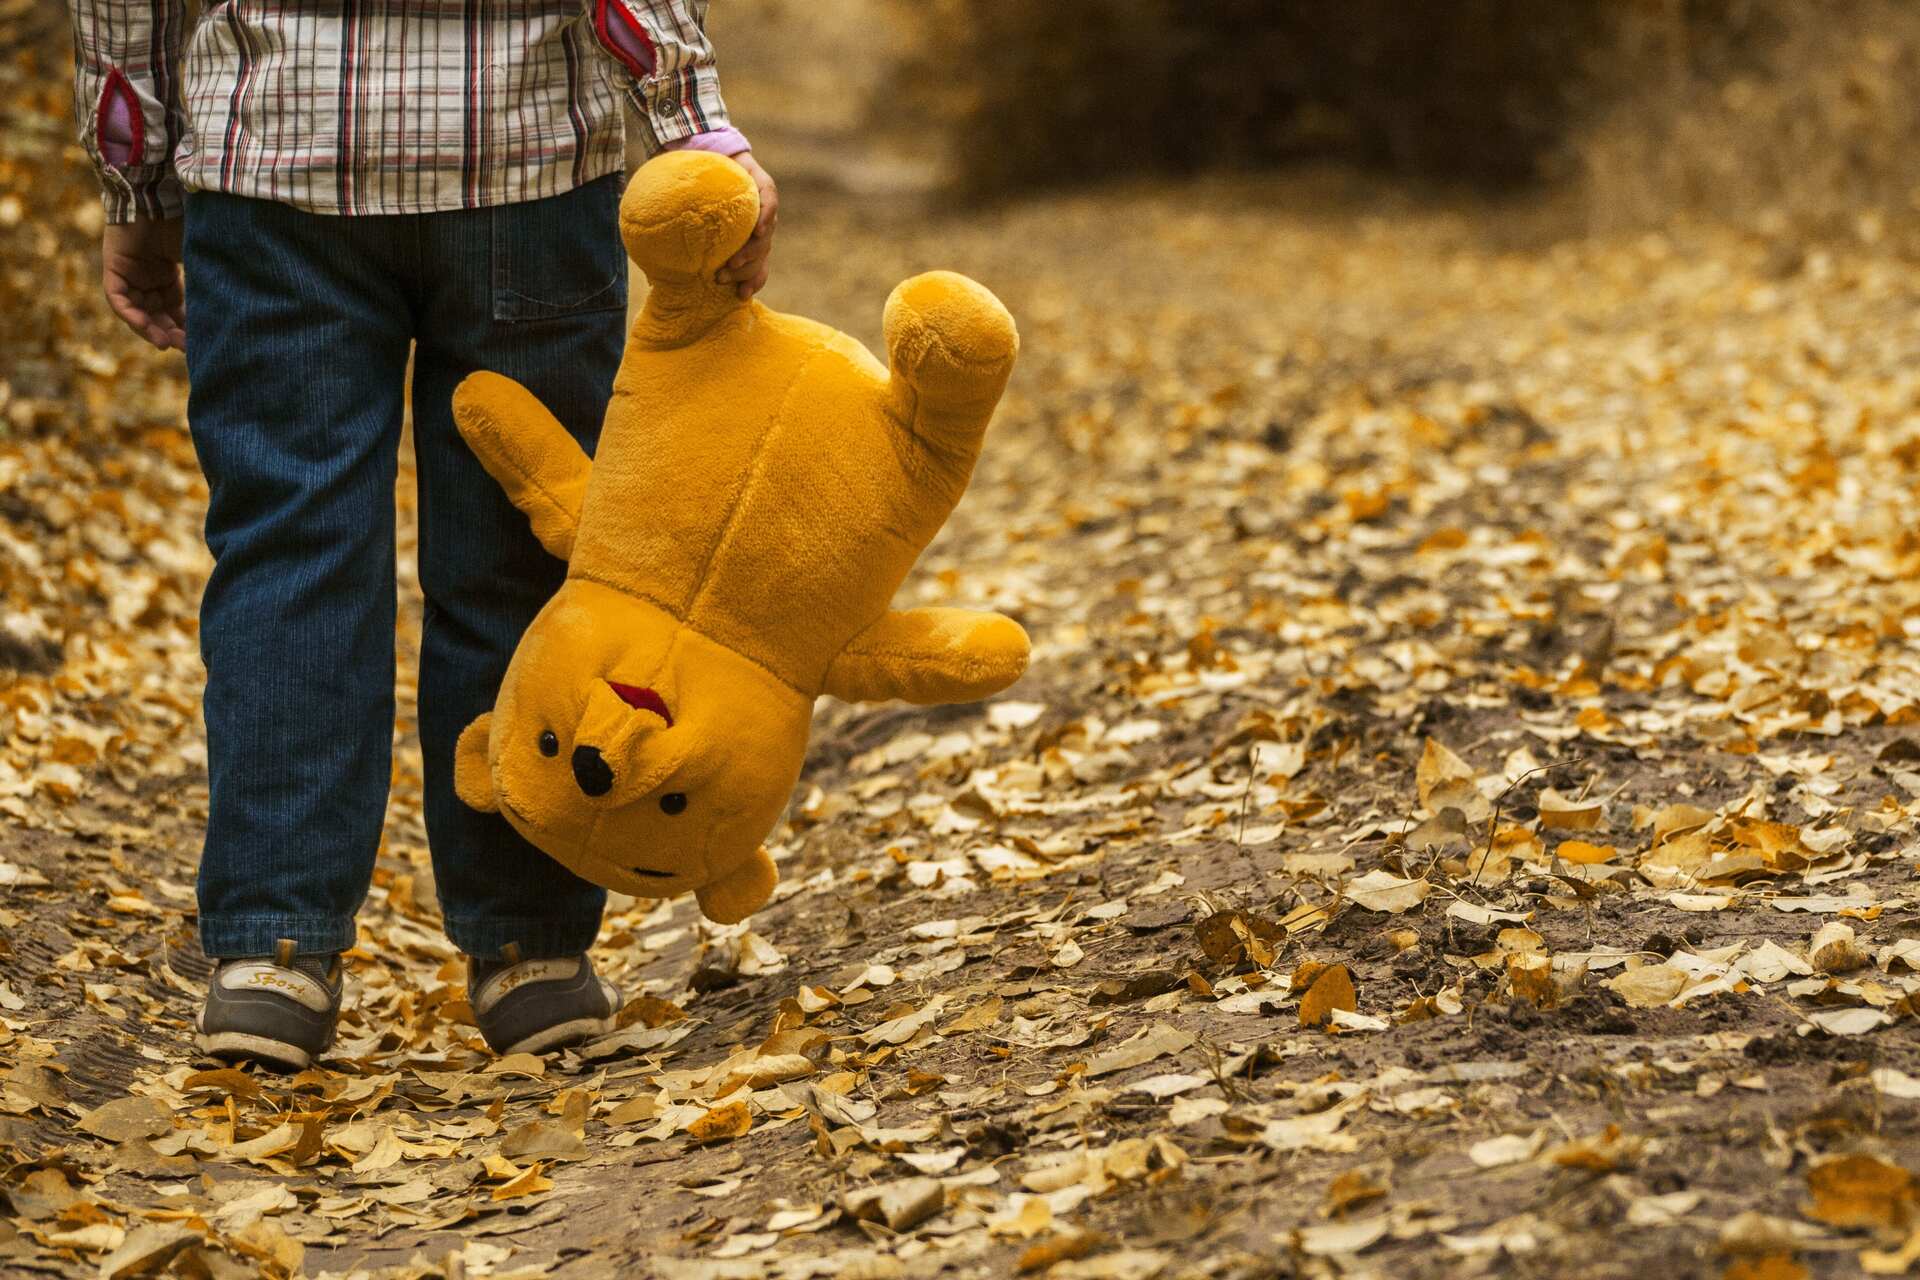 Boy carrying Winnie-the-Pooh toy